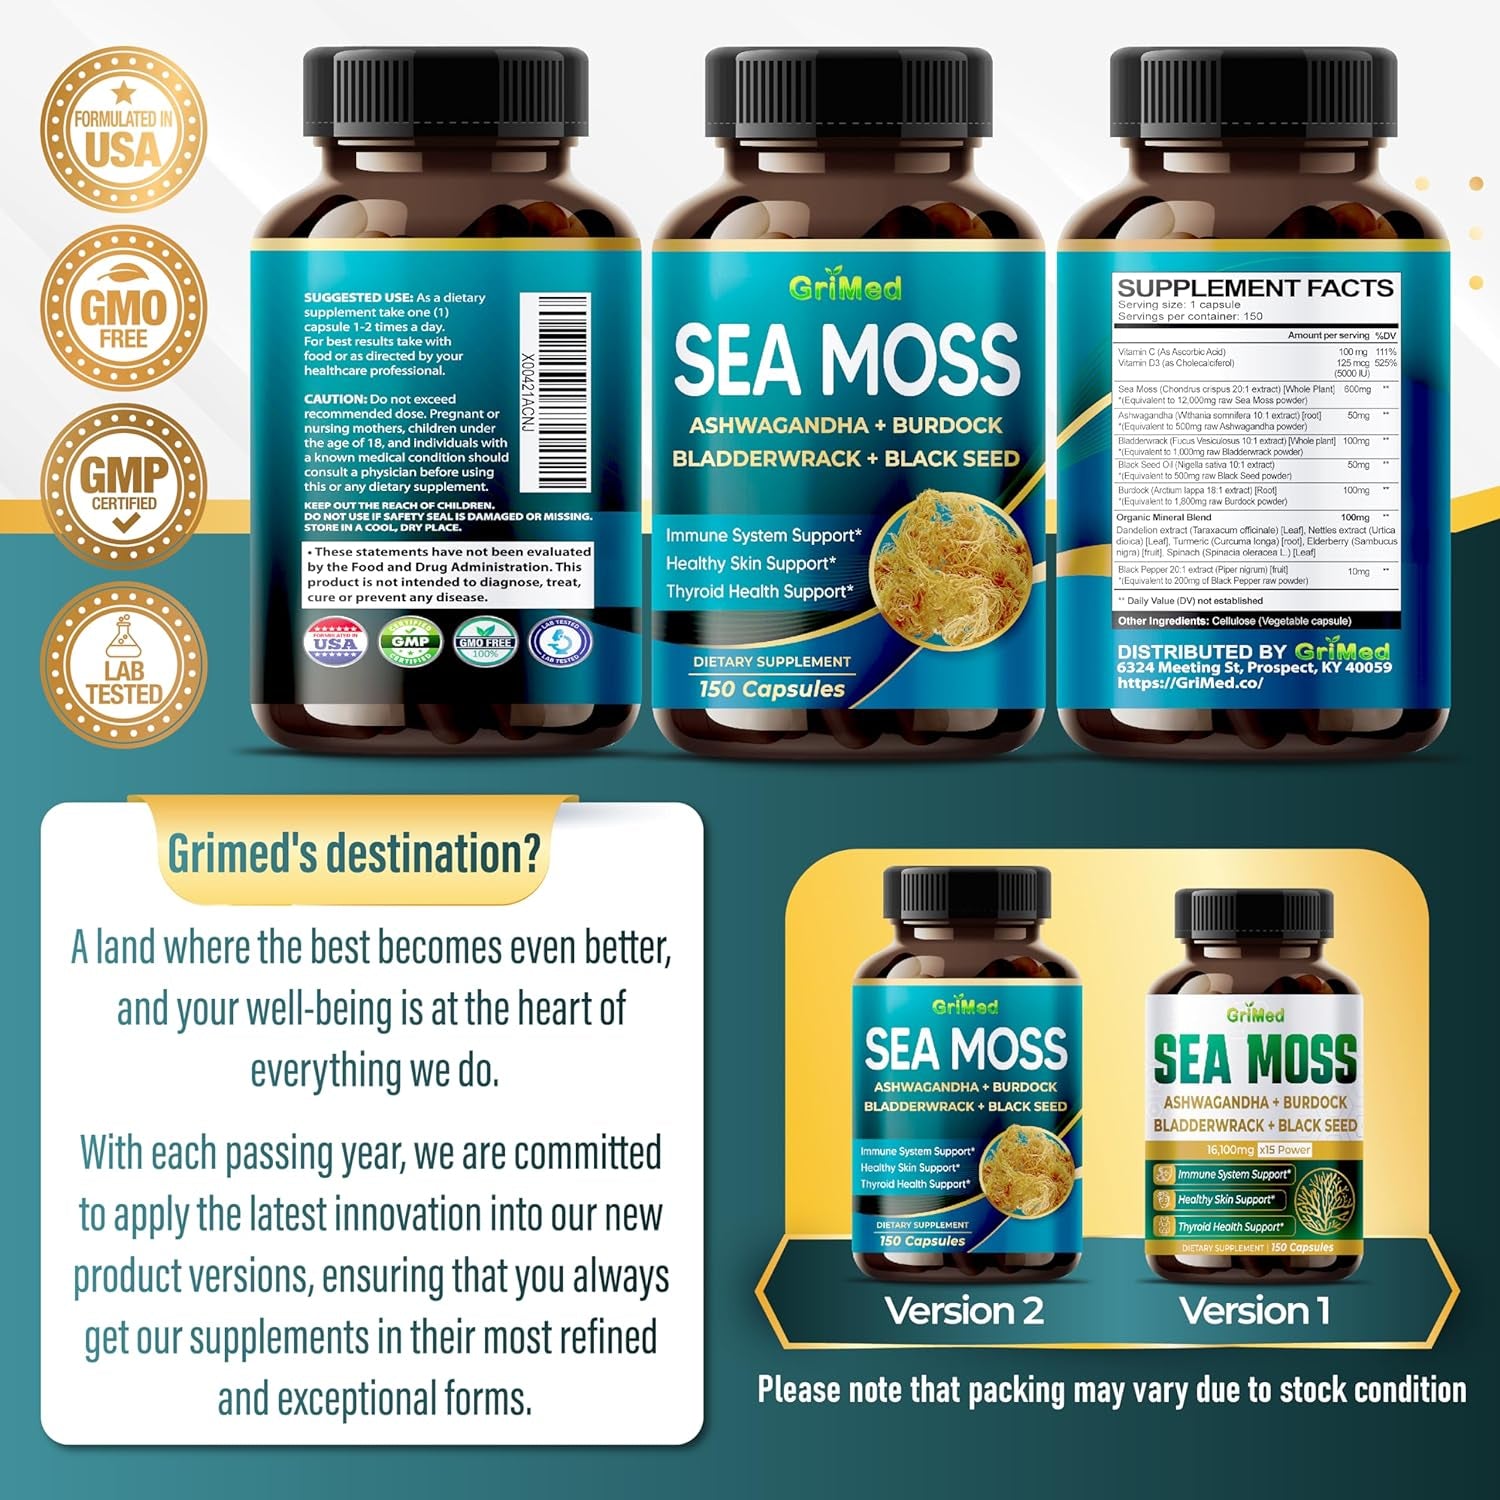 Premium Sea Moss 30:1 Extract 16,100Mg with Ashwagandha, Burdock Bladderwrack, Black Seed for Immune System, Skin, Digestion & Energy- Made in the USA (150 Count (Pack of 1))